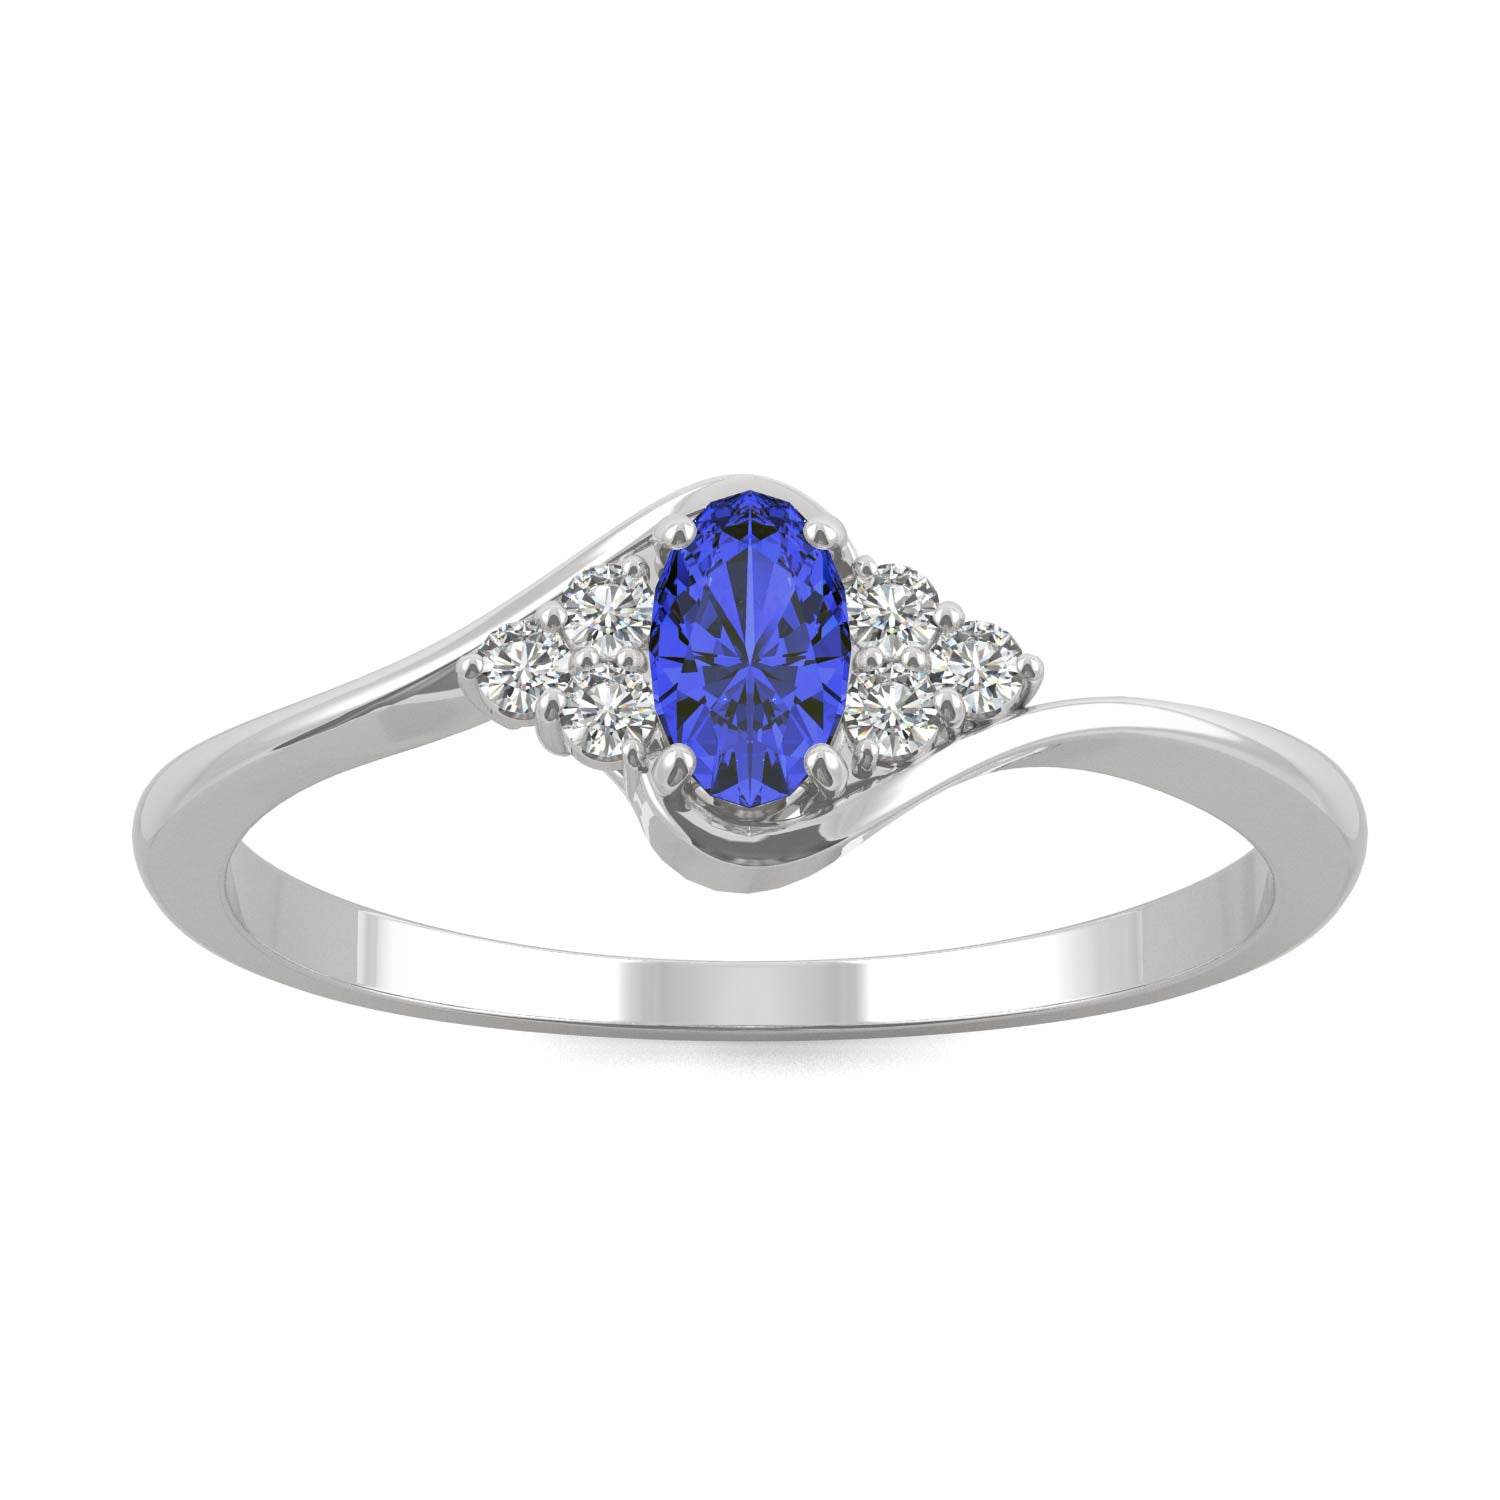 0.37 CTW DEW Oval Sapphire Bypass Ring in 14K White Gold